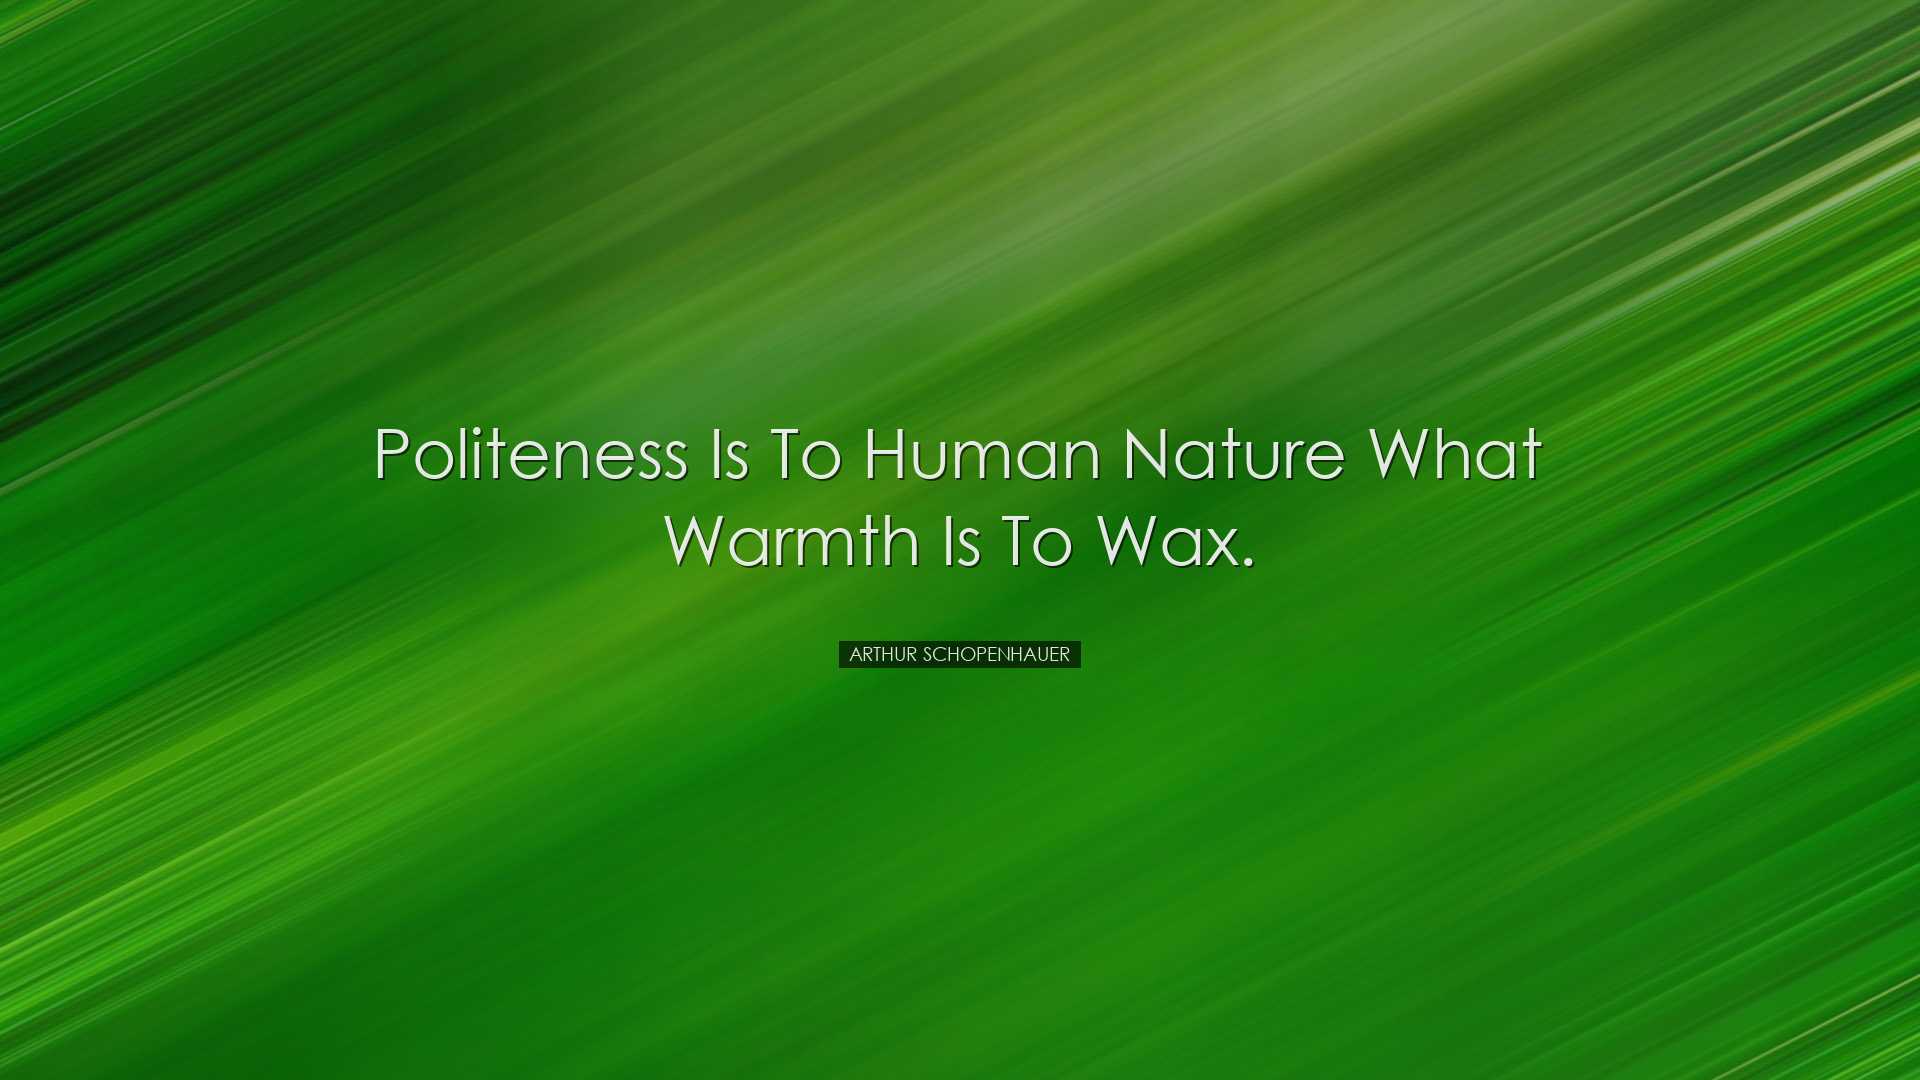 Politeness is to human nature what warmth is to wax. - Arthur Scho